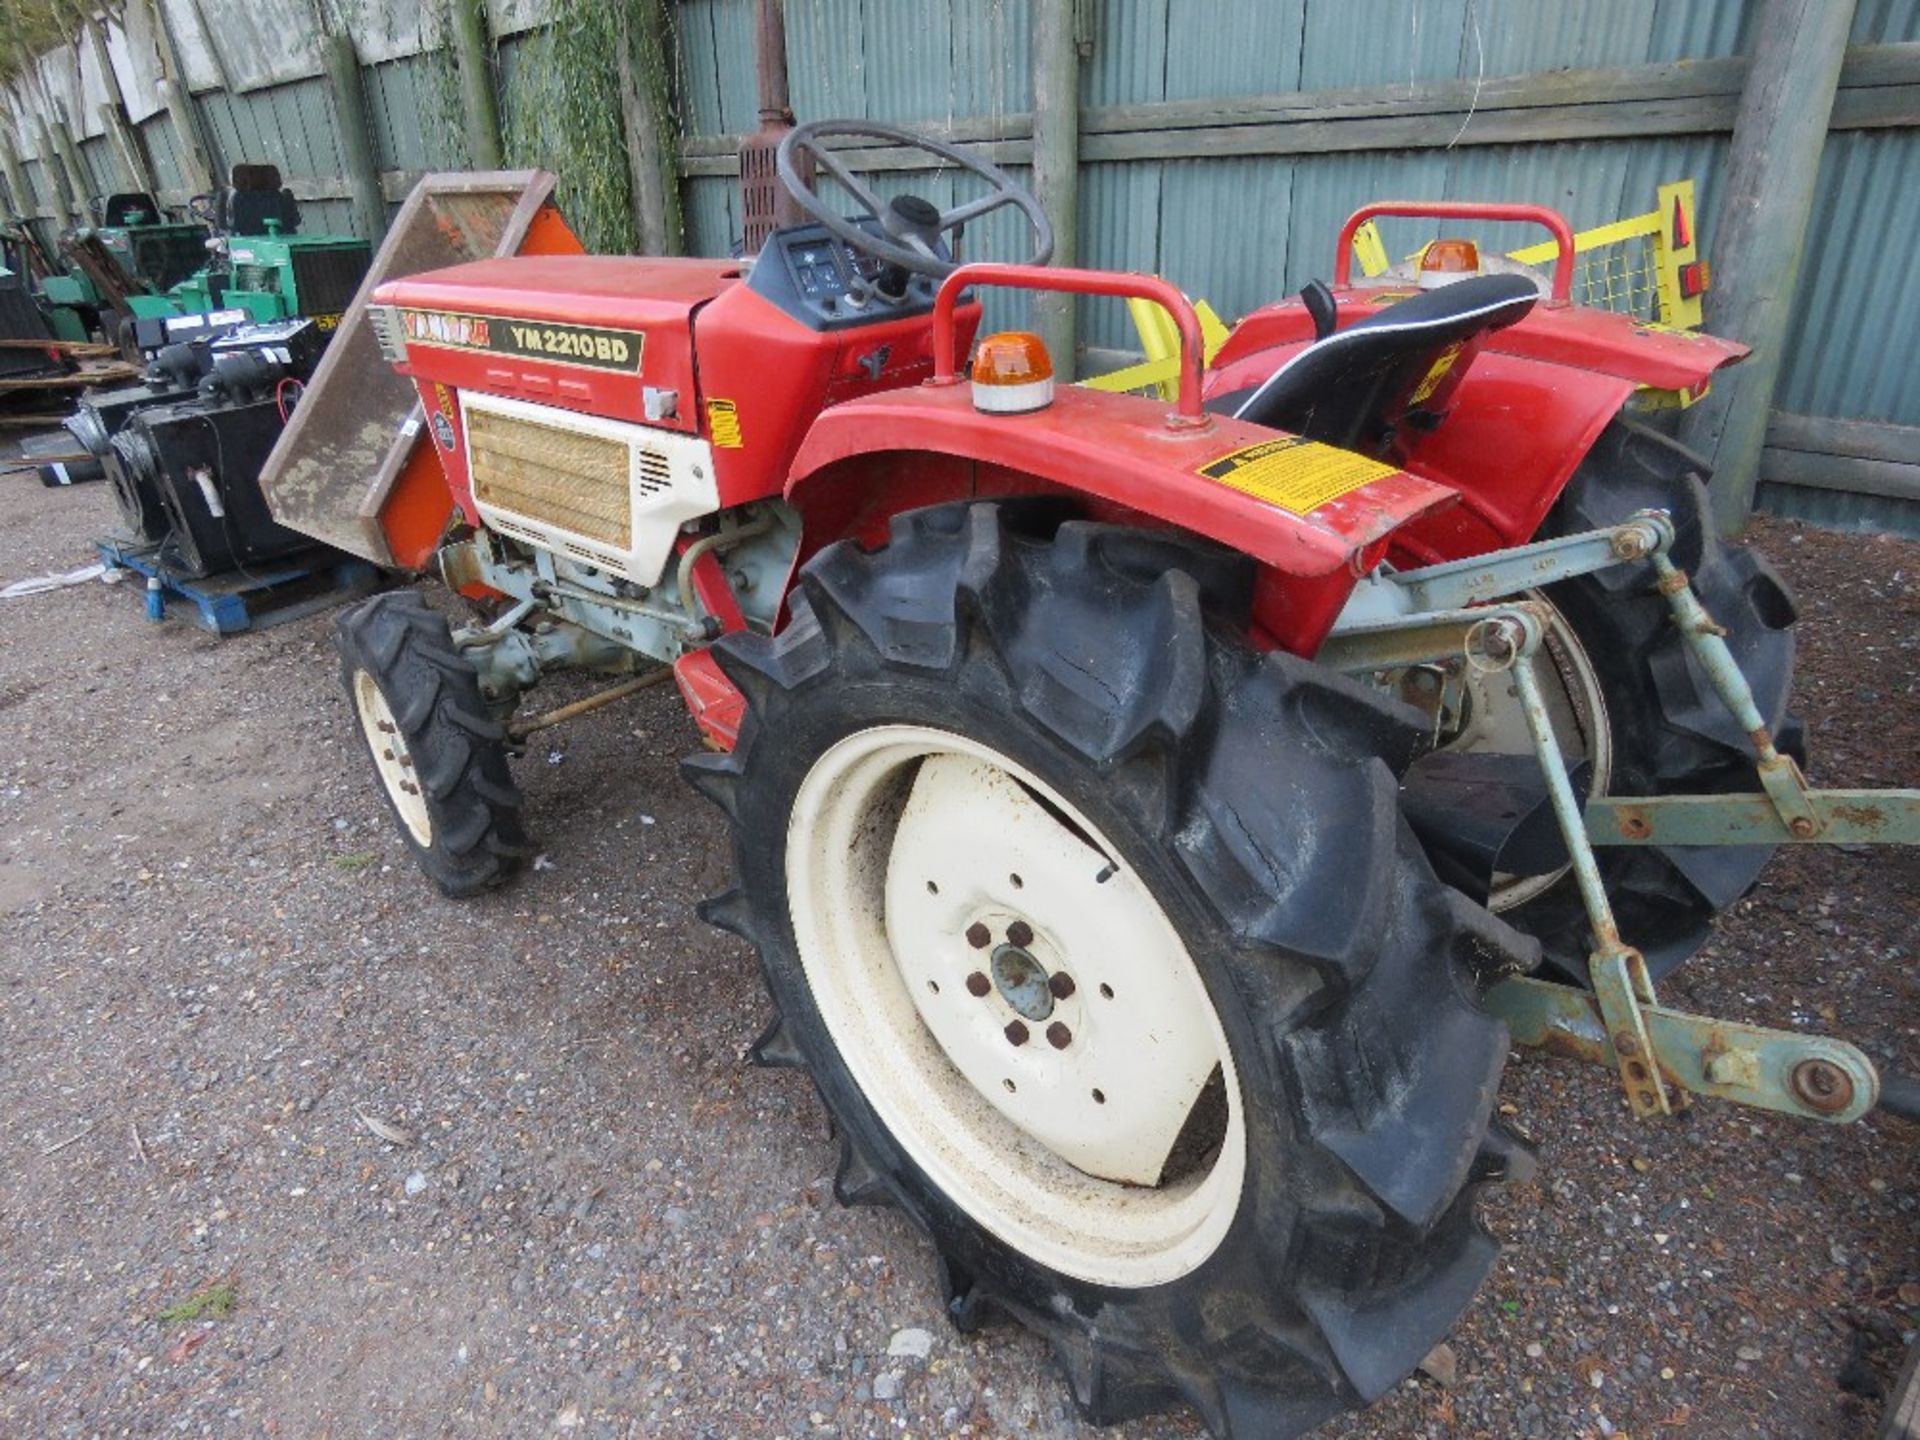 YANMAR YM2210D COMPACT AGRICULTURAL TRACTOR, 4WD, AGRICULTURAL TYRES, WITH REAR LINKAGE. - Image 6 of 7